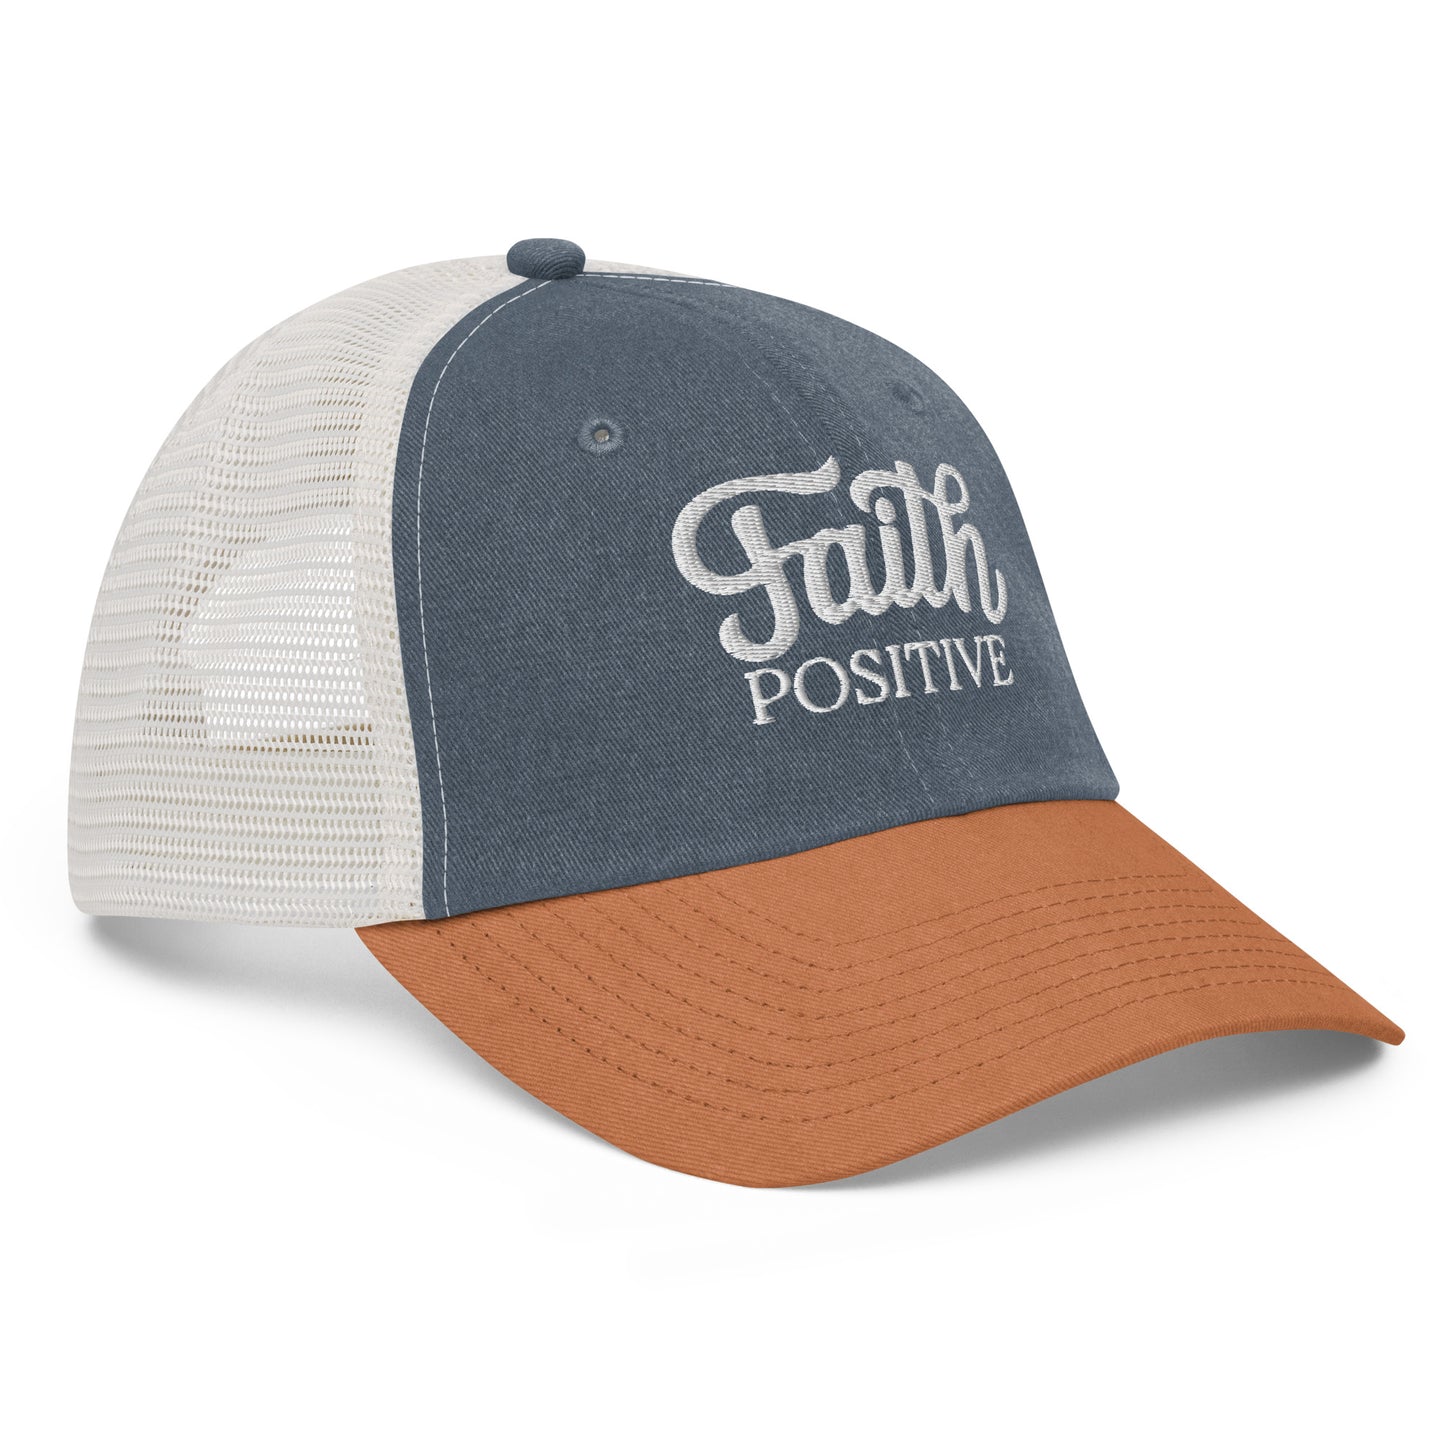 This is the Faith Positive low profile hat. The Faith Positive logo is embroidered on the front with white thread. This hat is pigment dyed, it has a mesh back, blue front and orange bill. This is the side view of the product.